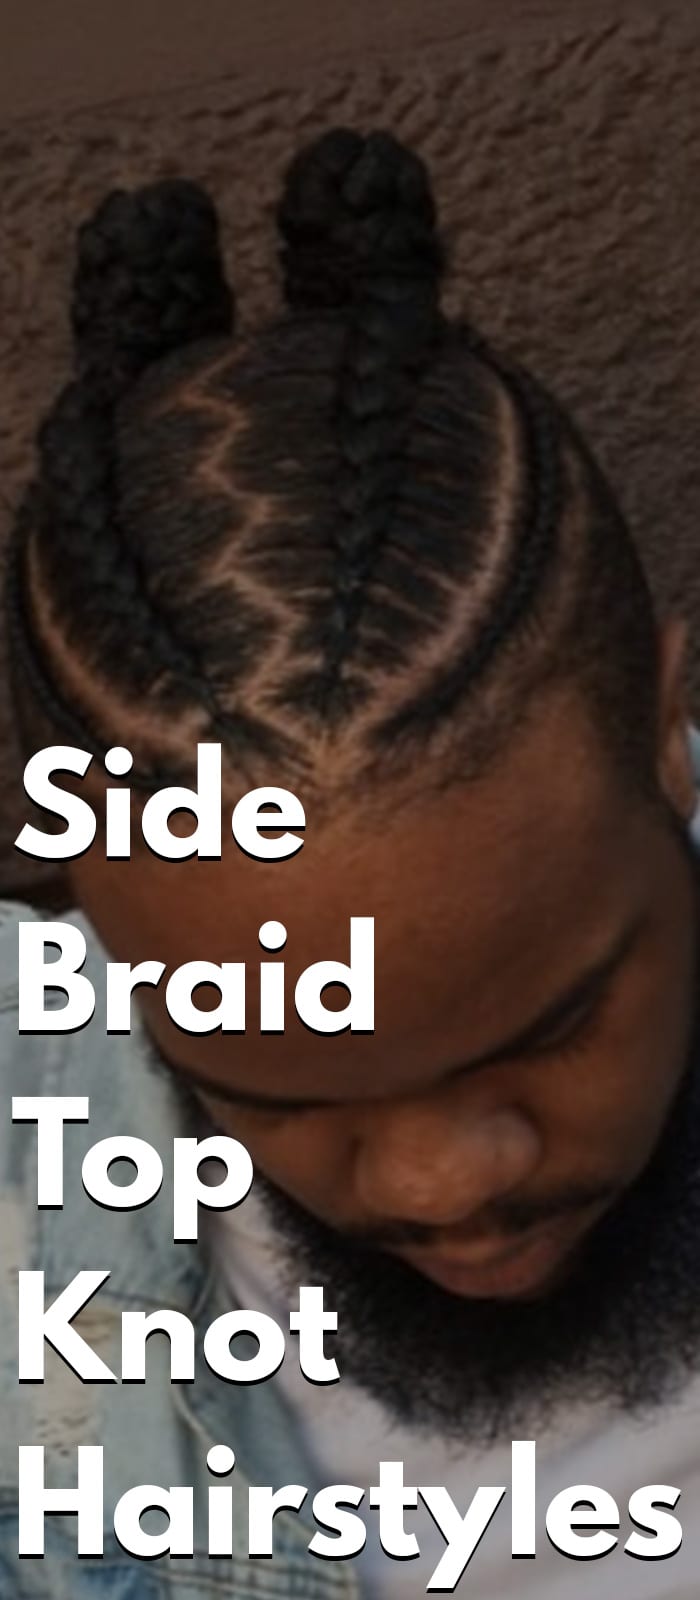 Side Braid Top Knot Hairstyles